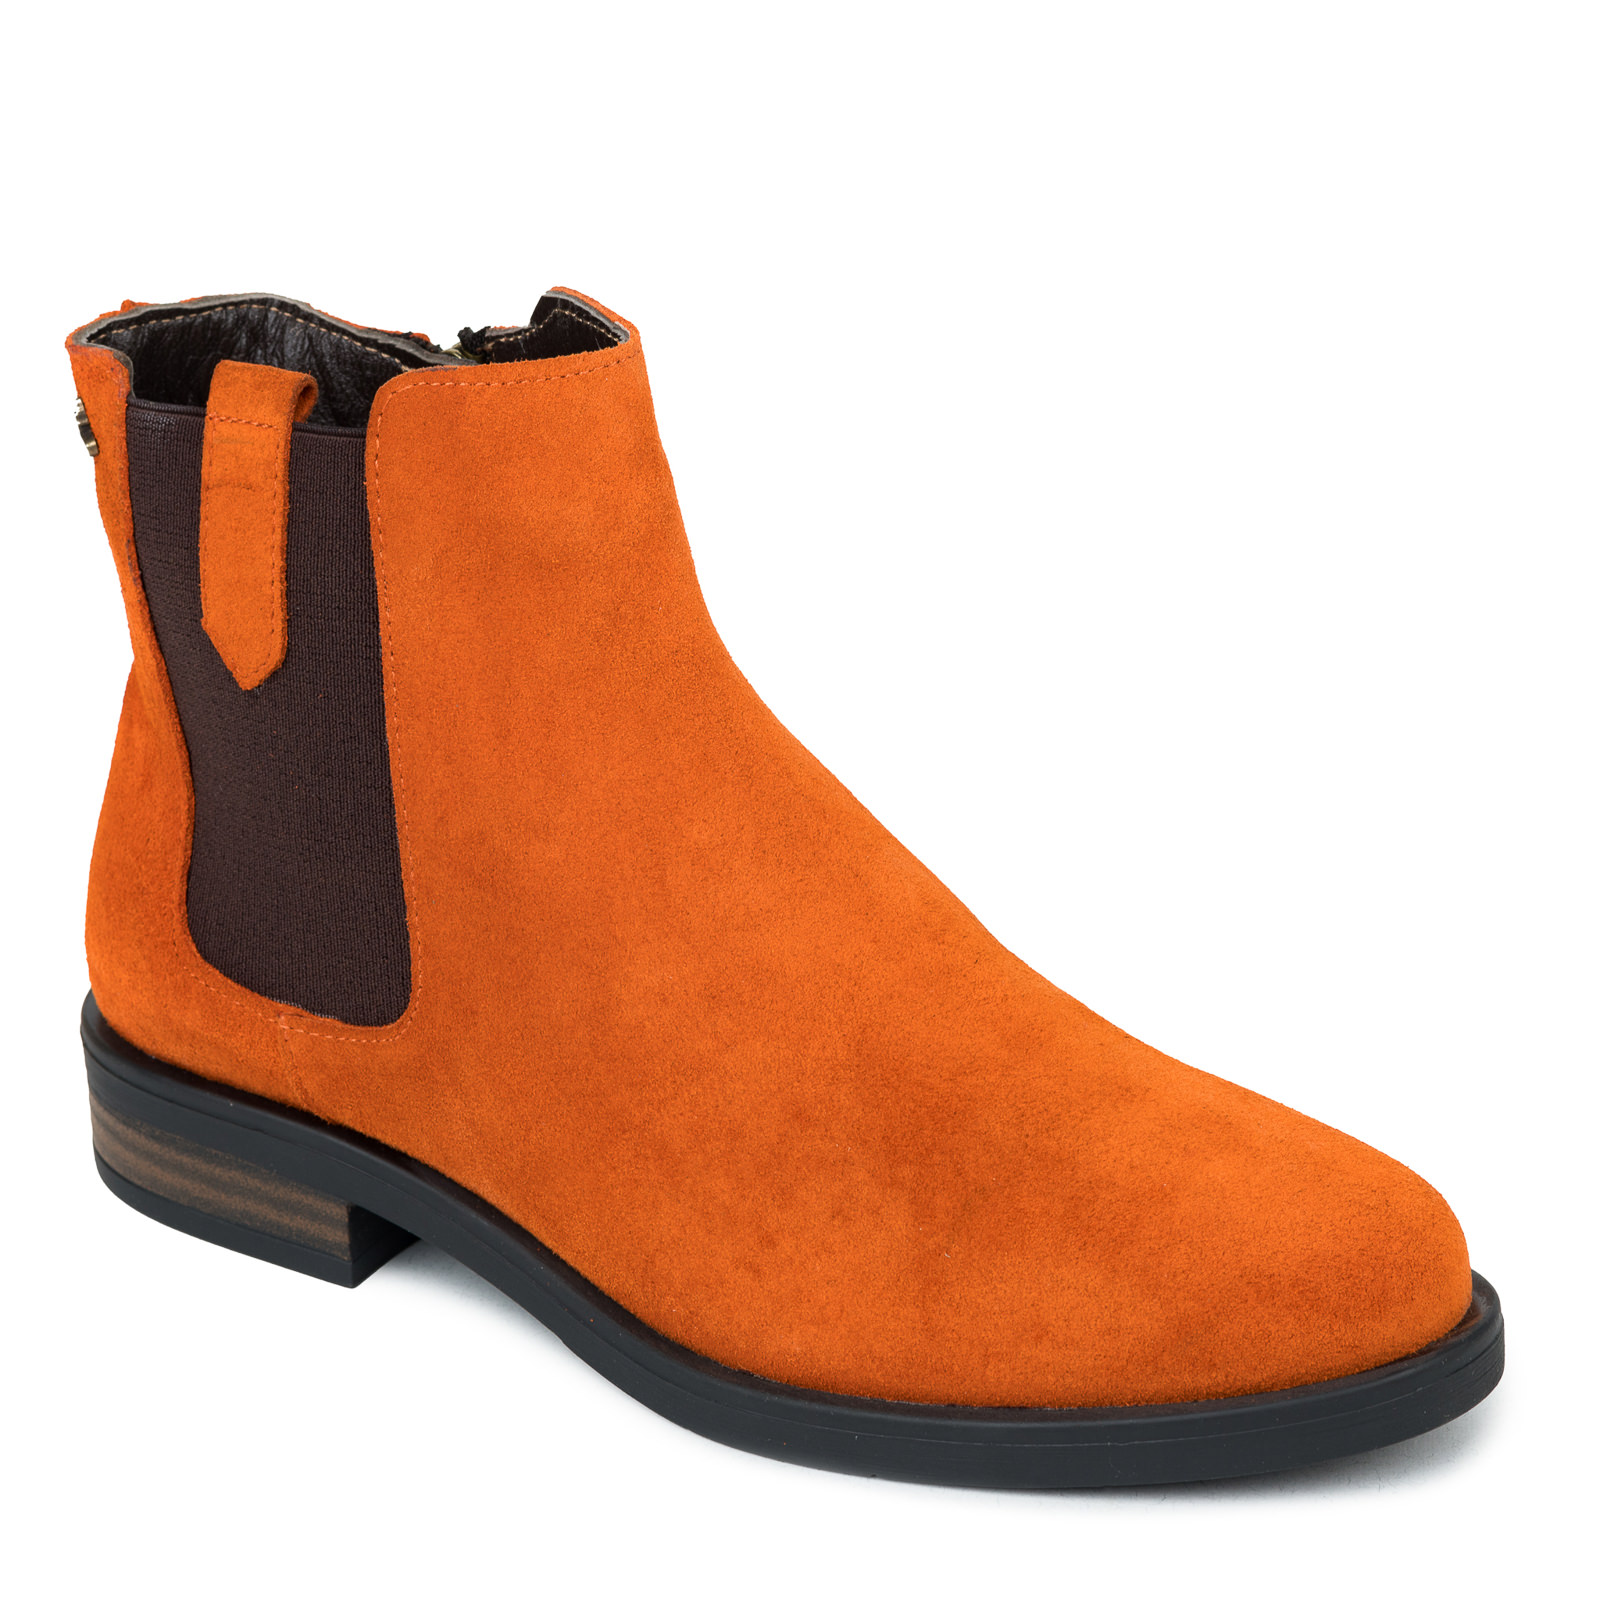 Leather ankle boots B312 - ORANGE